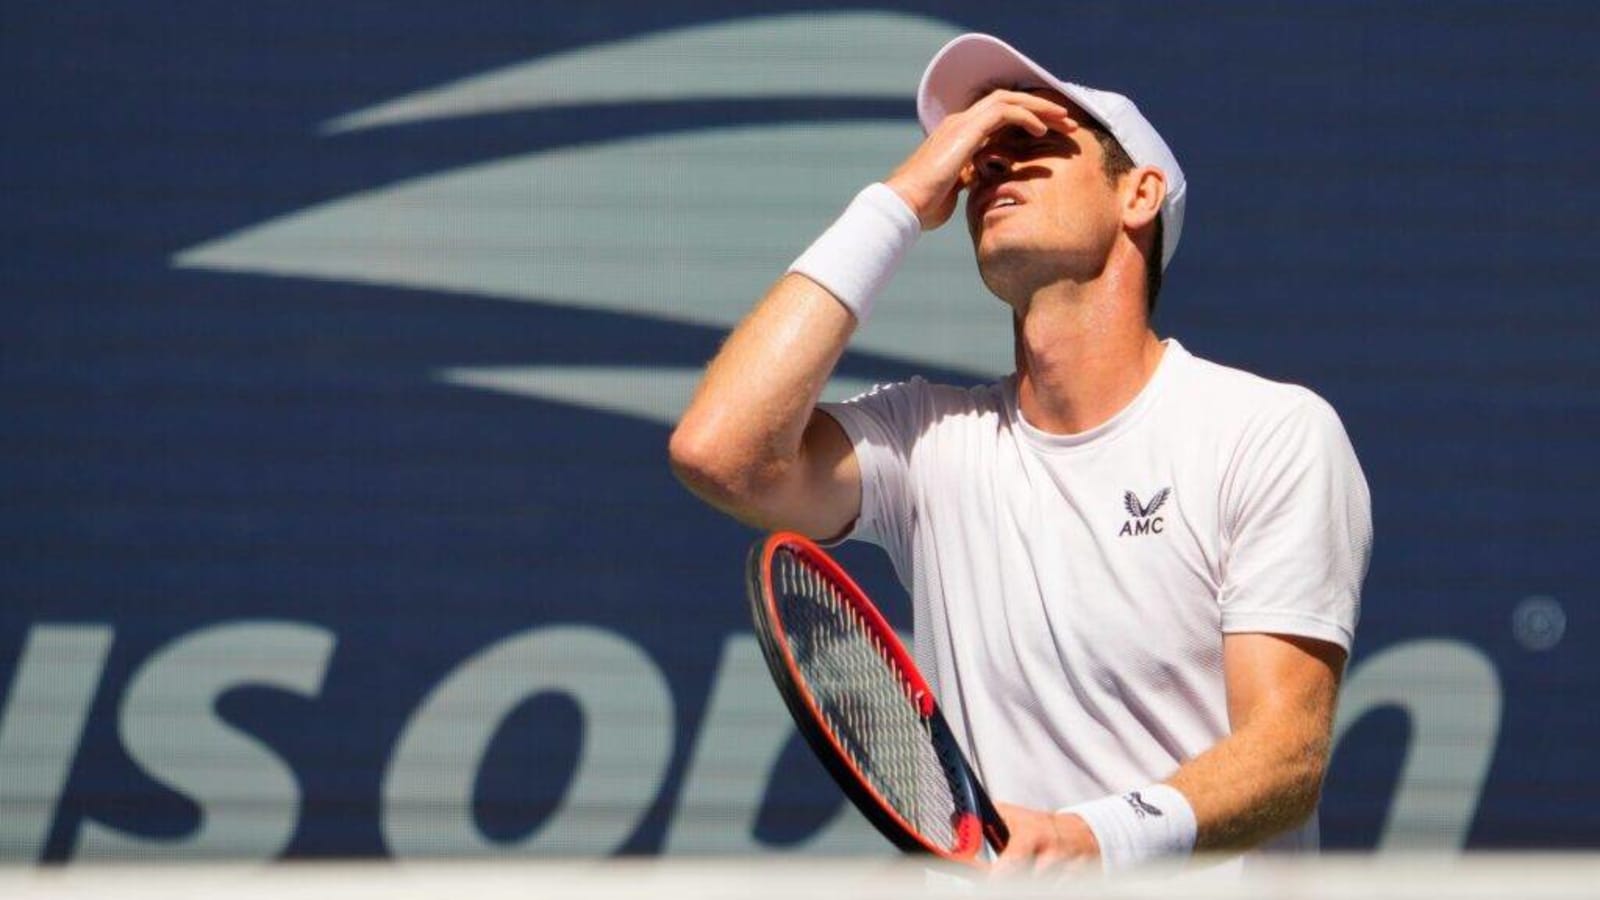 Andy Murray Sidelined For Extended Period After Suffering Ruptured Ankle Ligament